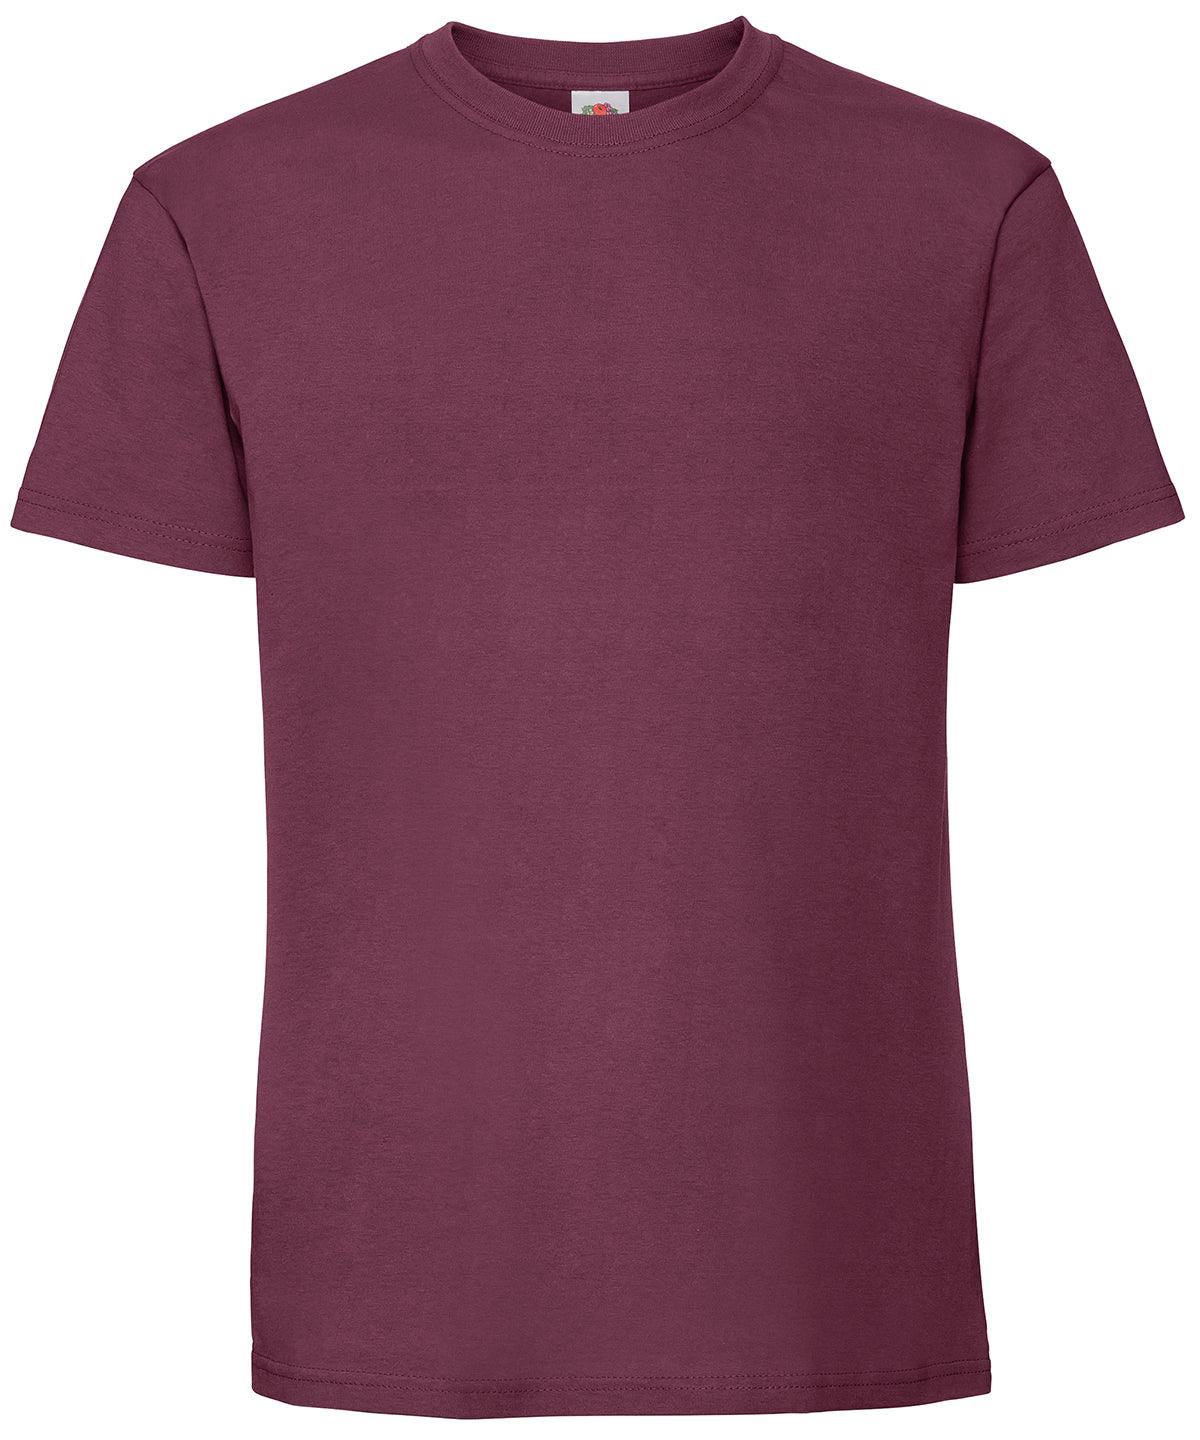 Burgundy - Ringspun premium T T-Shirts Fruit of the Loom Must Haves, New Colours for 2023, Safe to wash at 60 degrees, T-Shirts & Vests, Tees safe to wash at 60 degrees Schoolwear Centres